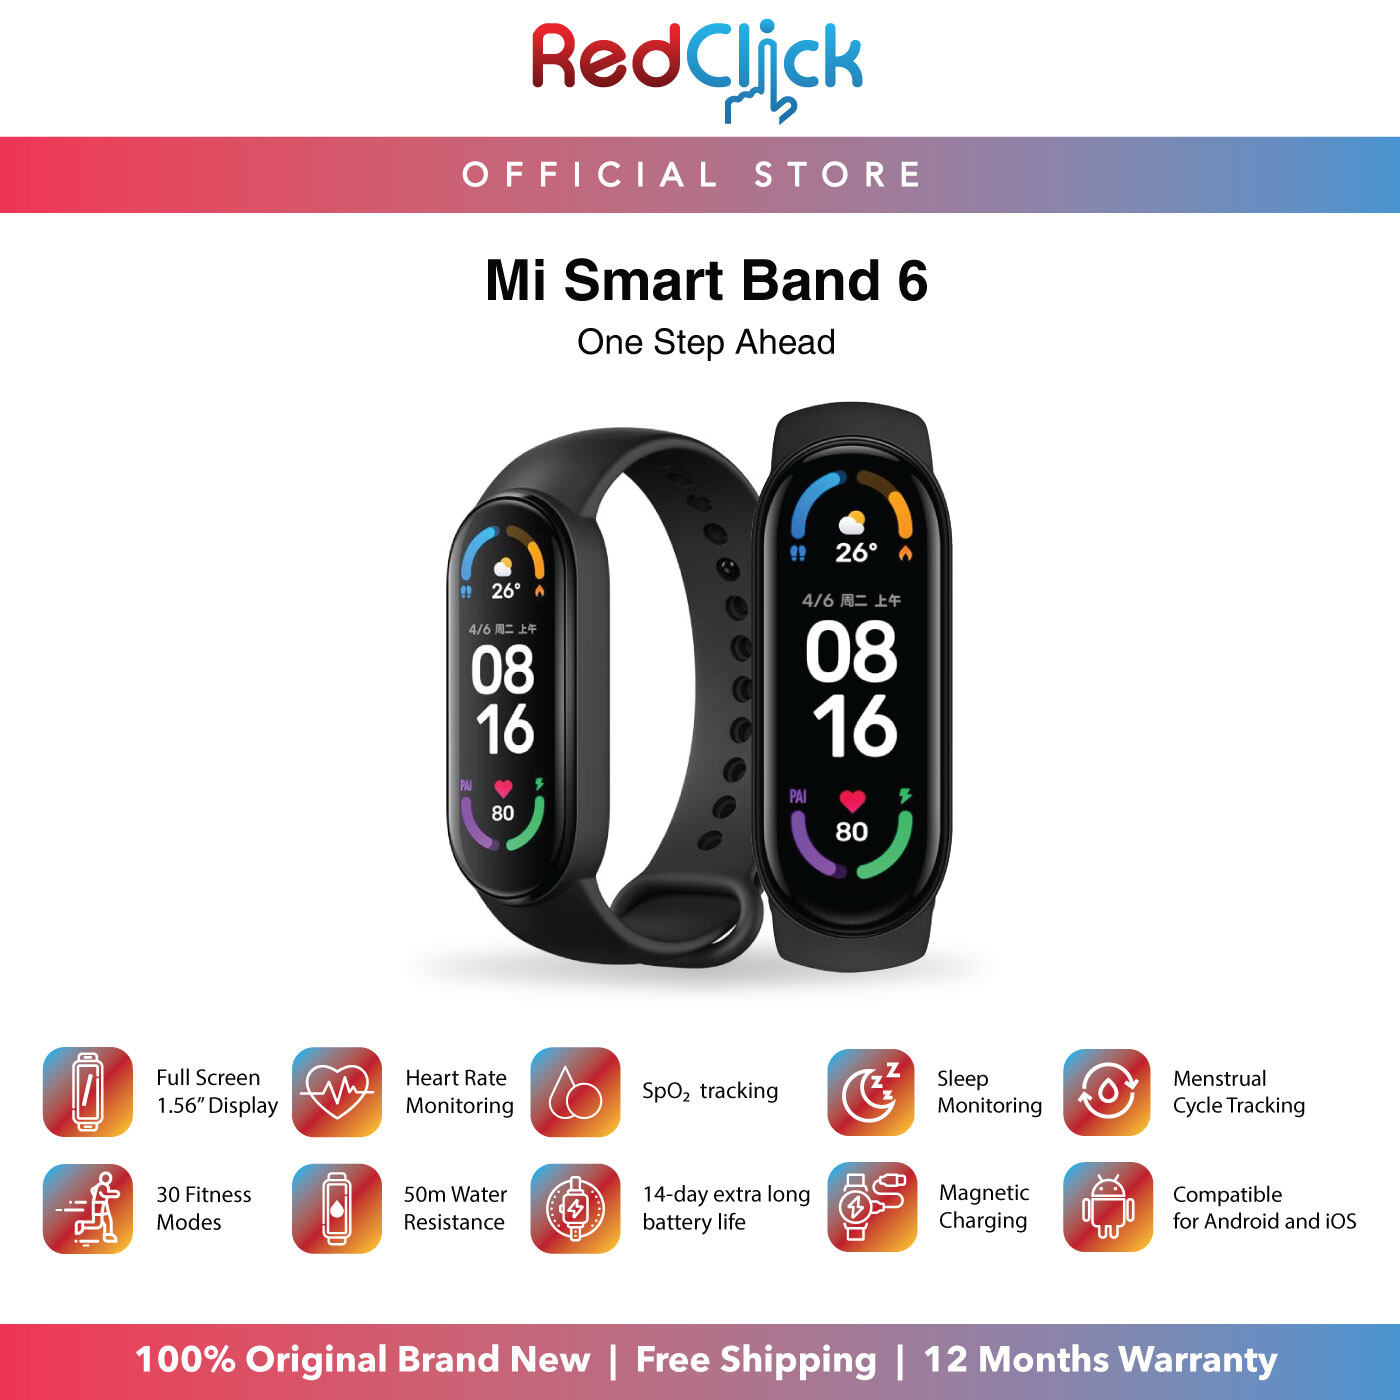 Xiaomi Mi Band 6 Full Screen 1.56" AMOLED Display SpO Tracking 24 Hours Smart Heart Rate Monitoring 30 Fitness Modes 5 ATM Water Resistance Original Xiaomi Product